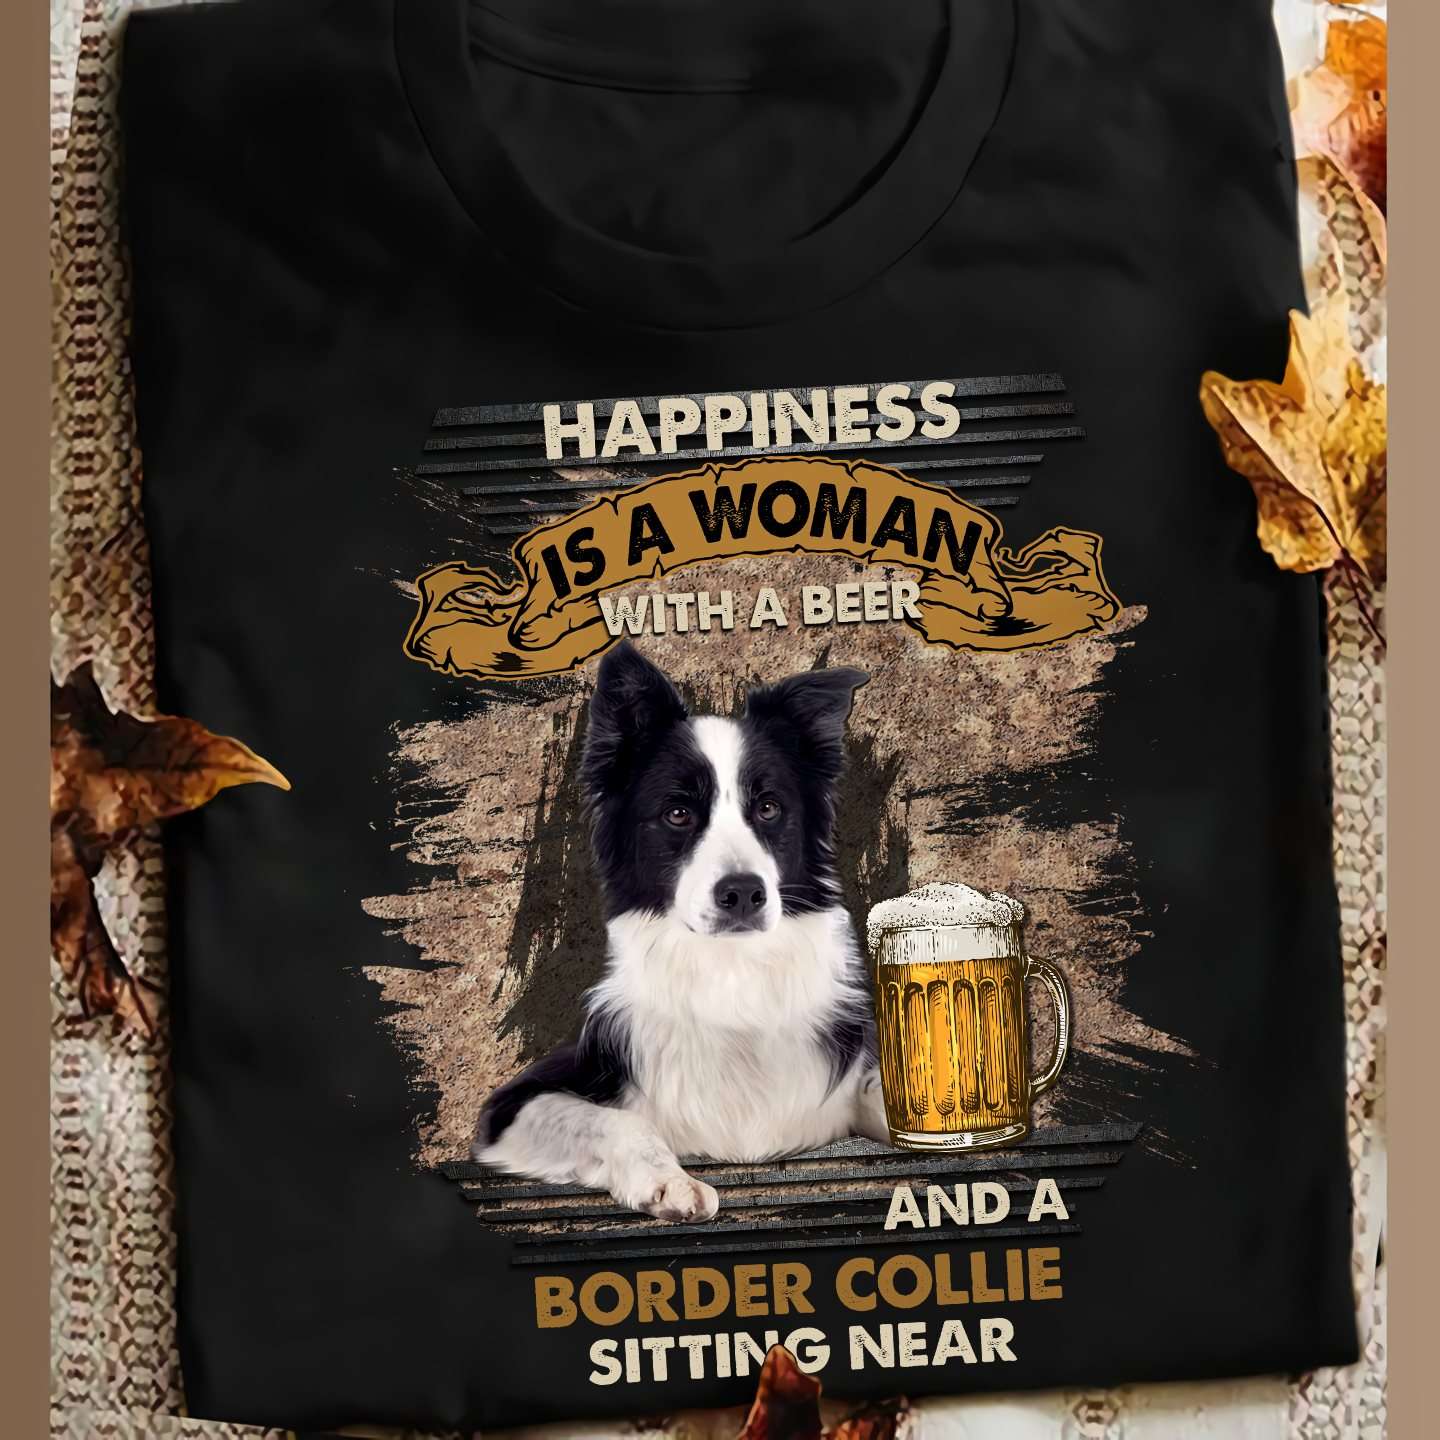 Border Collie Beer - Happiness is a woman with a beer and a border collie sitting near